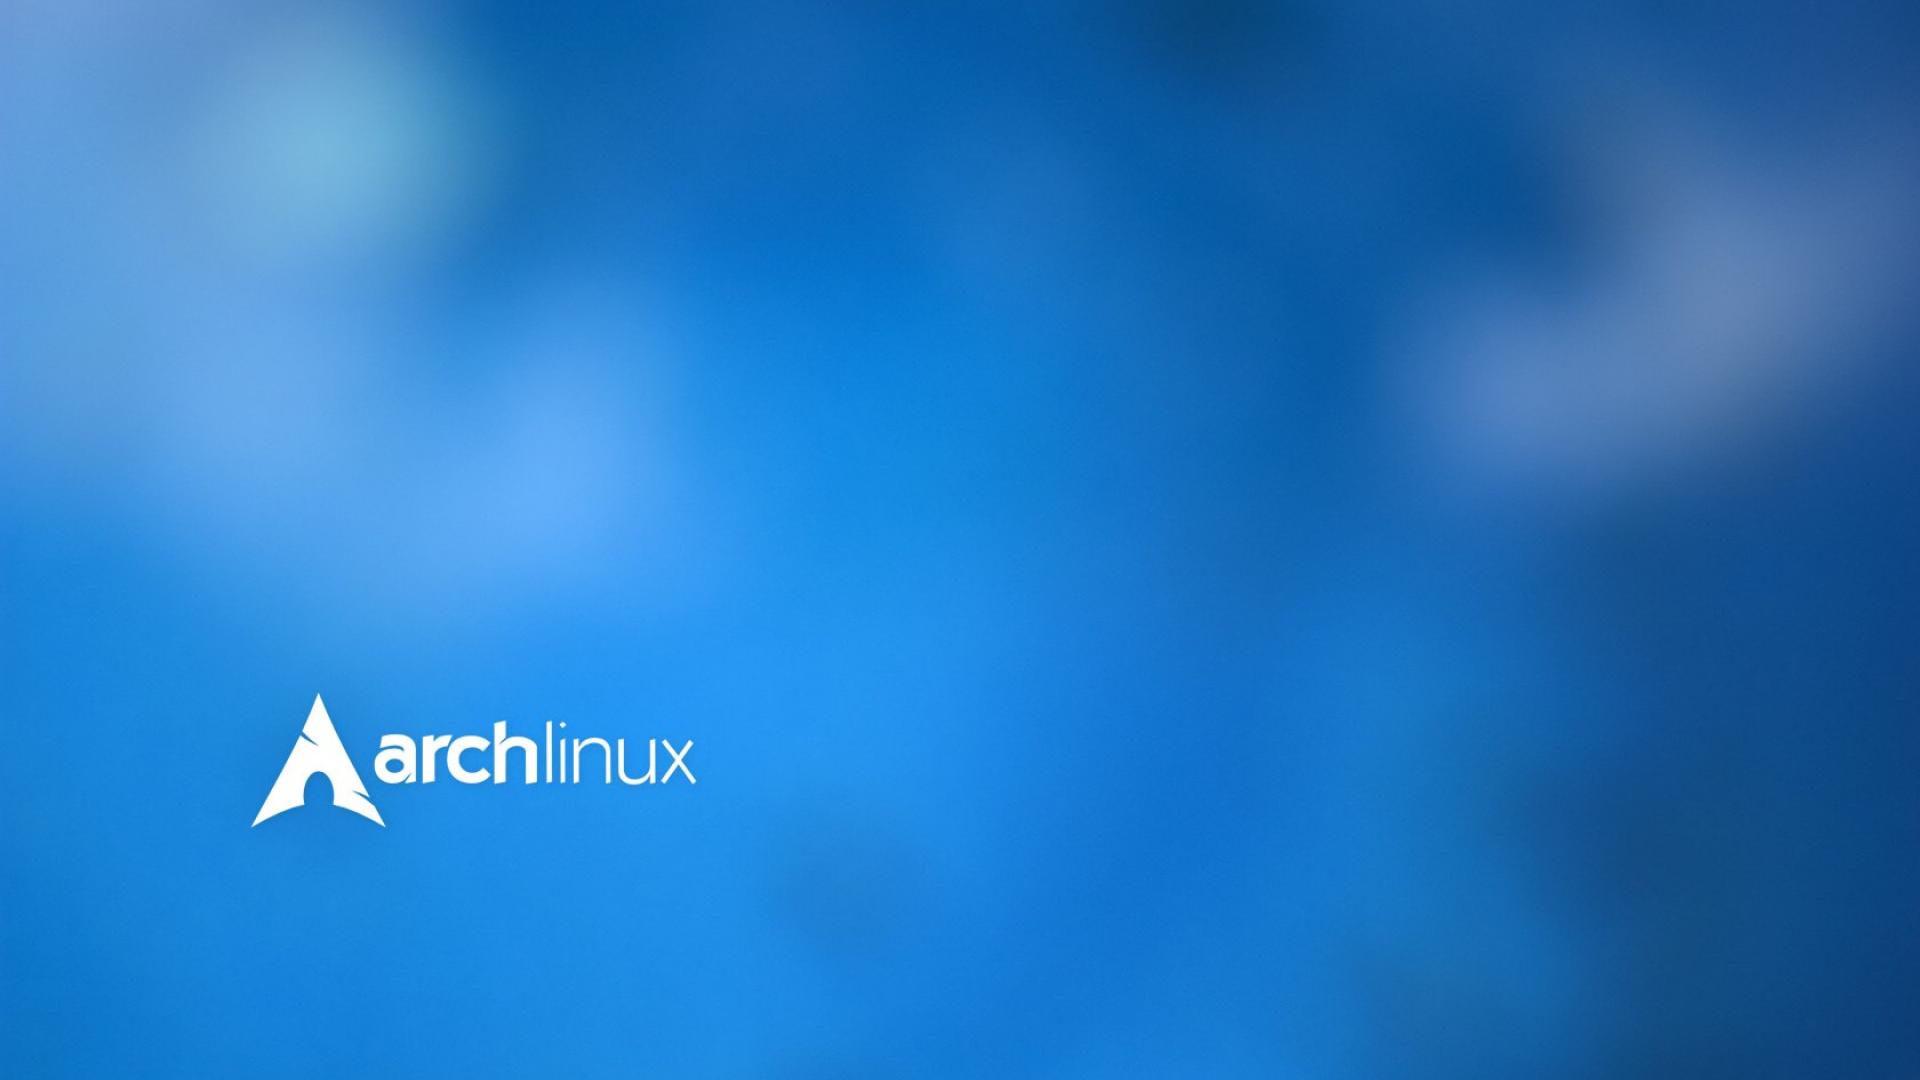 Download Free Arch Linux Background